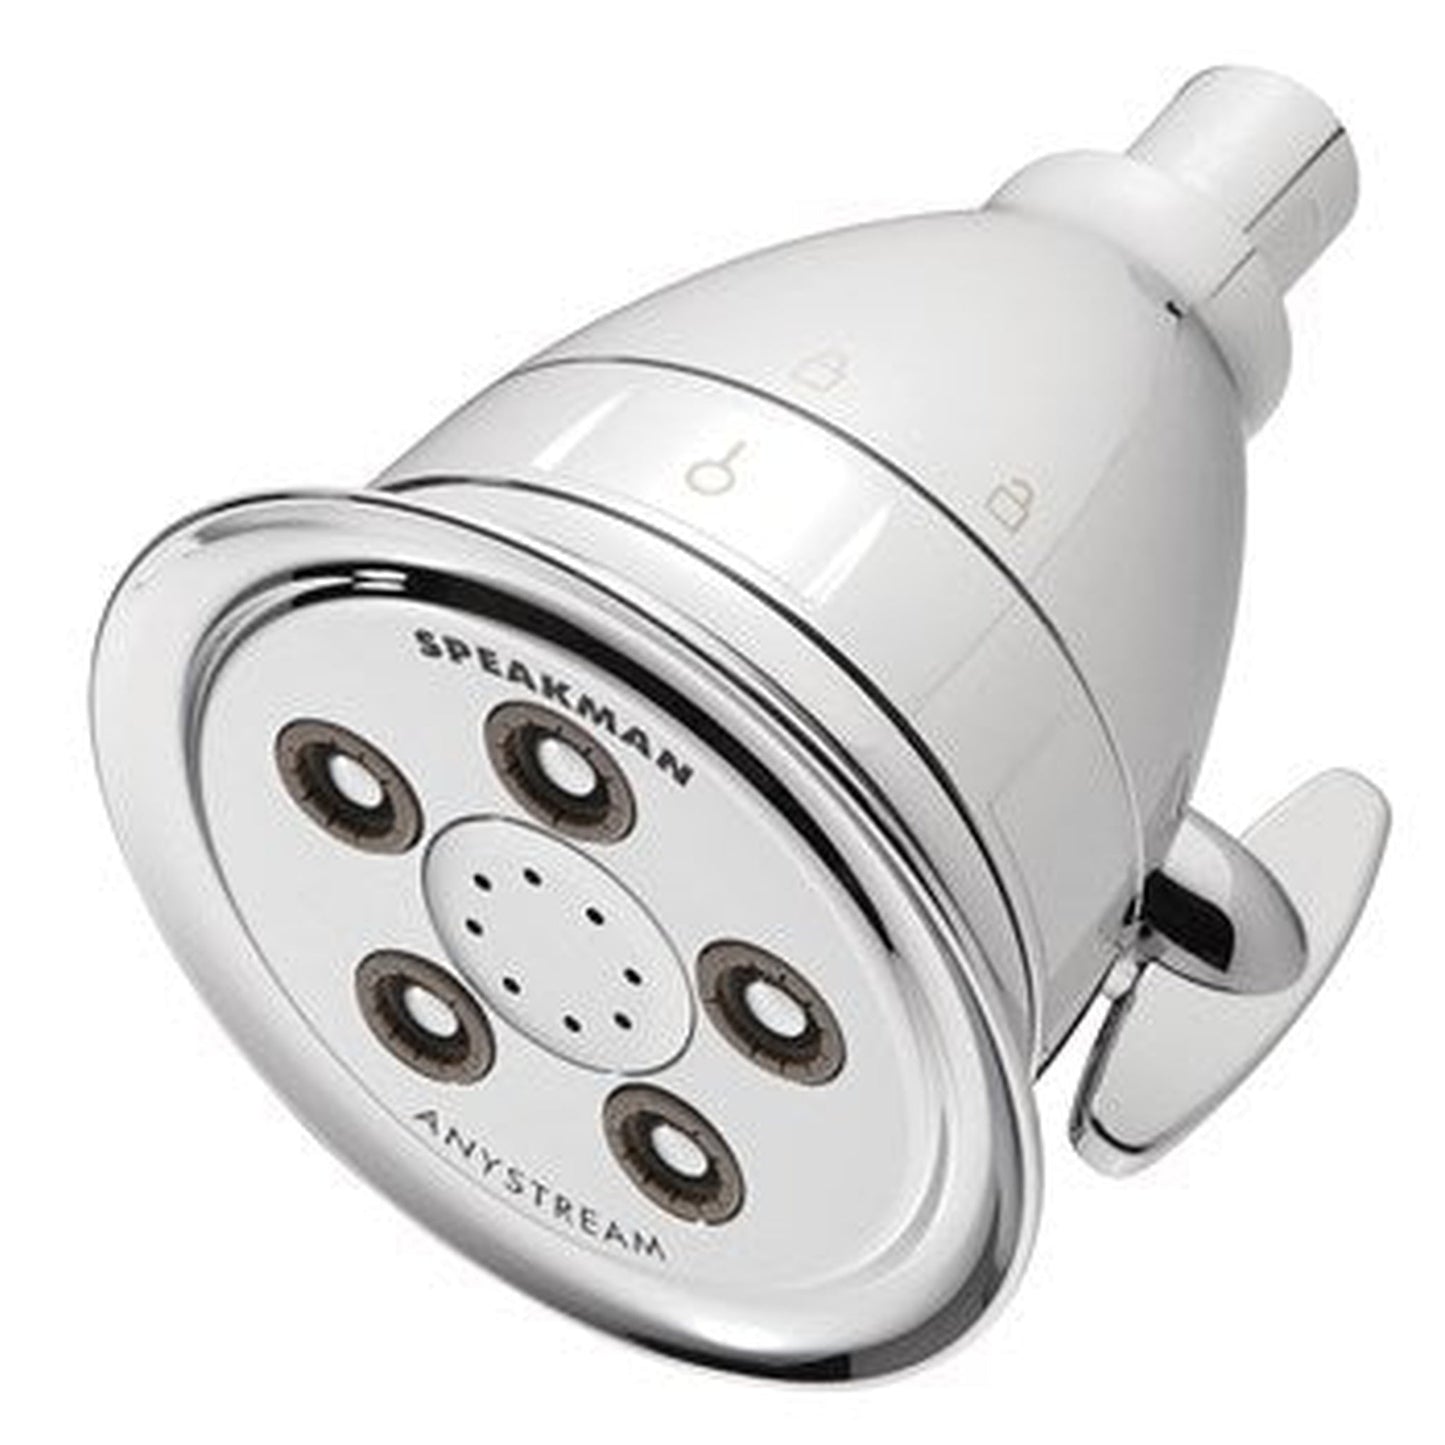 Speakman Hotel Pure 1.75 GPM 5-Plunger Patented Anystream Polished Chrome Shower Head With Internal Filtering Cartridge